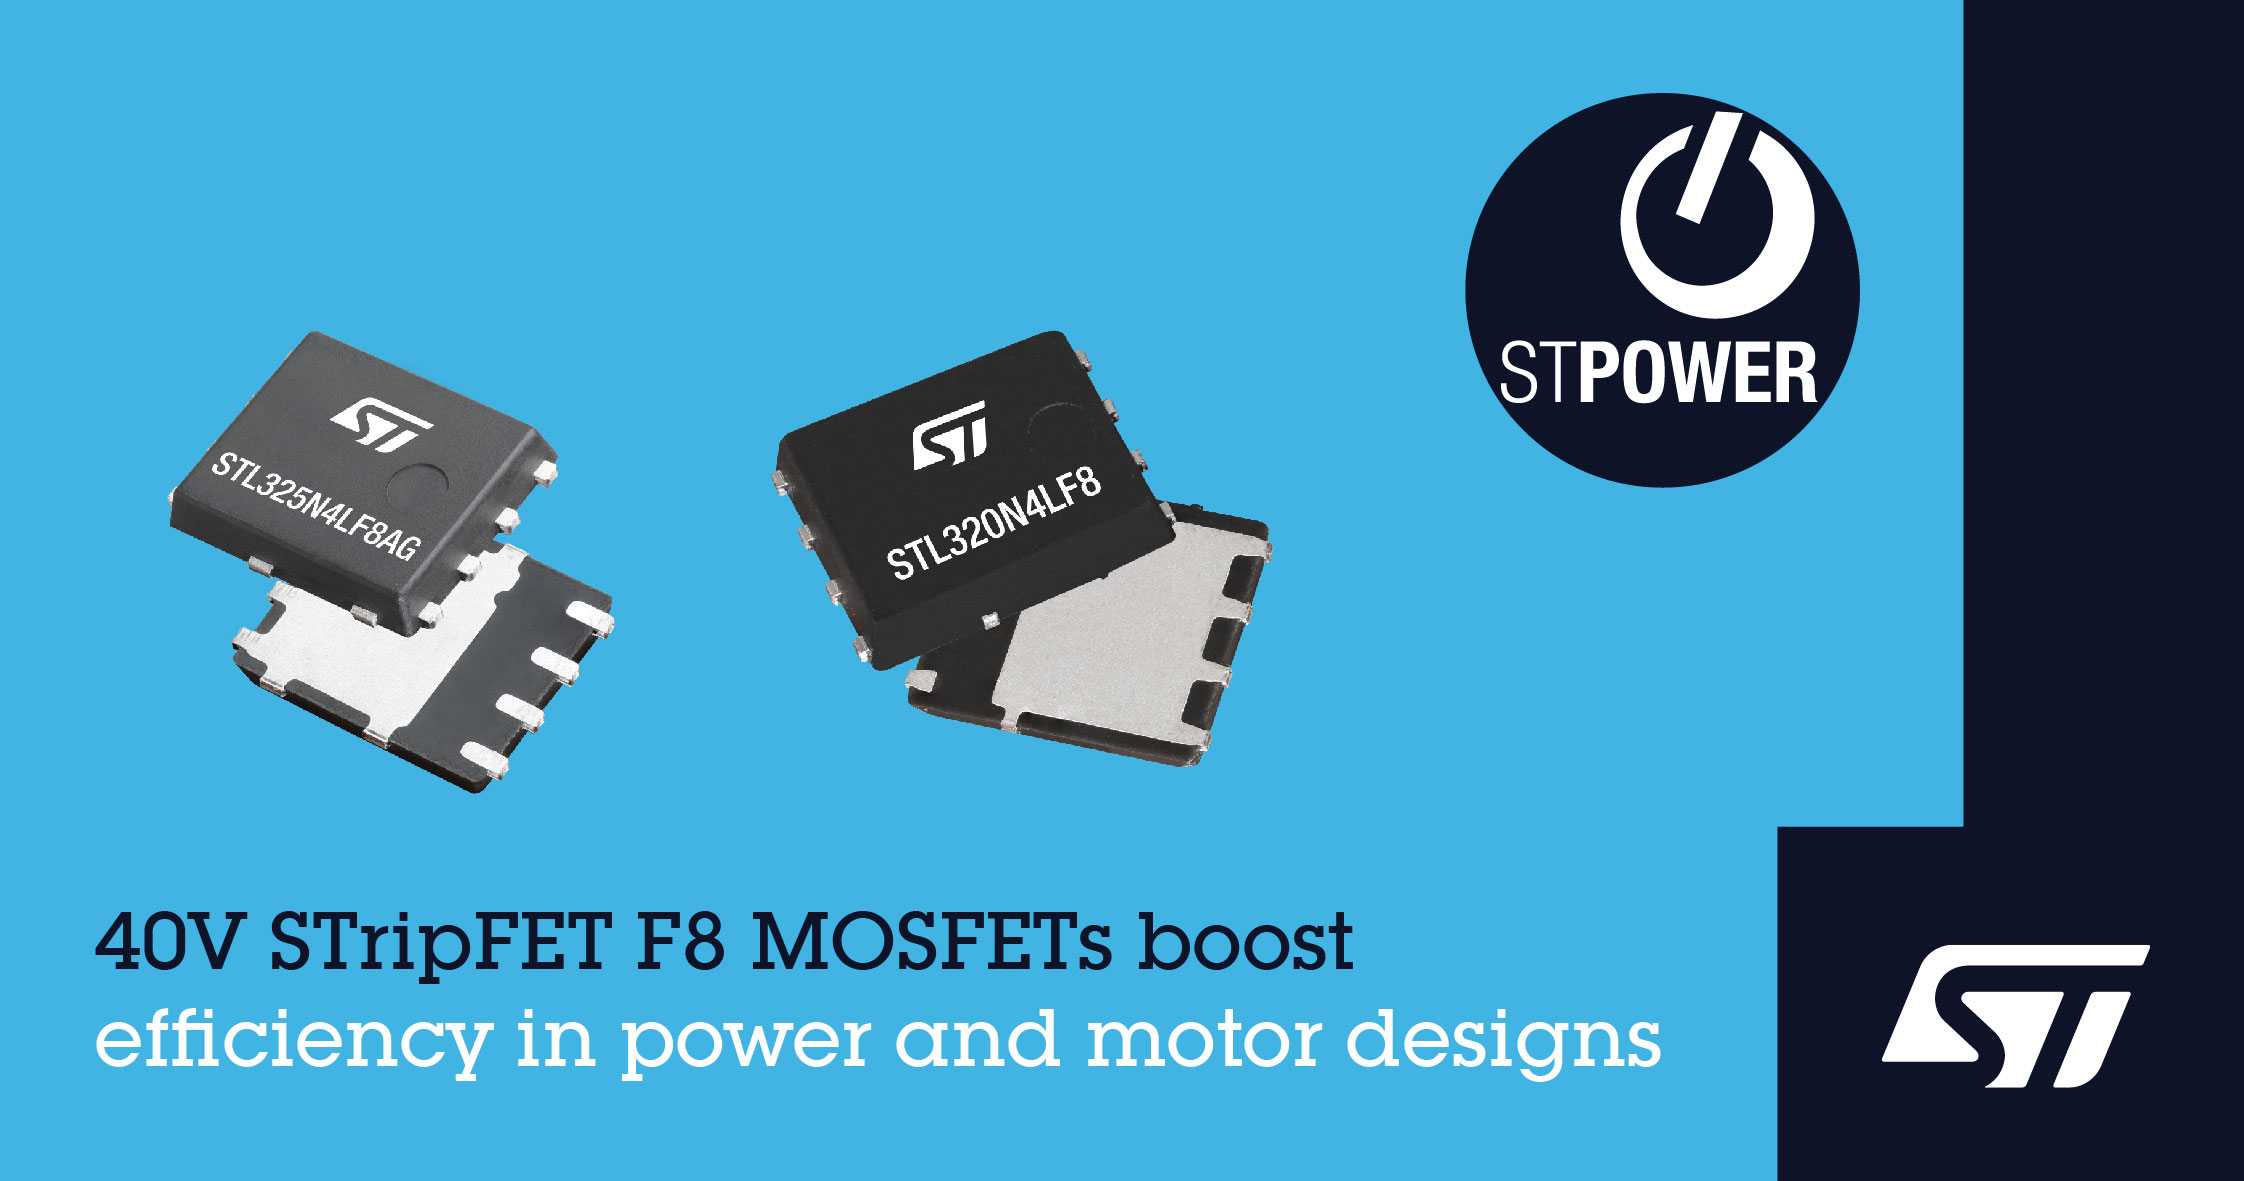 100V Industrial-Grade STripFET F8 Devices Improve Figure of Merit by 40%